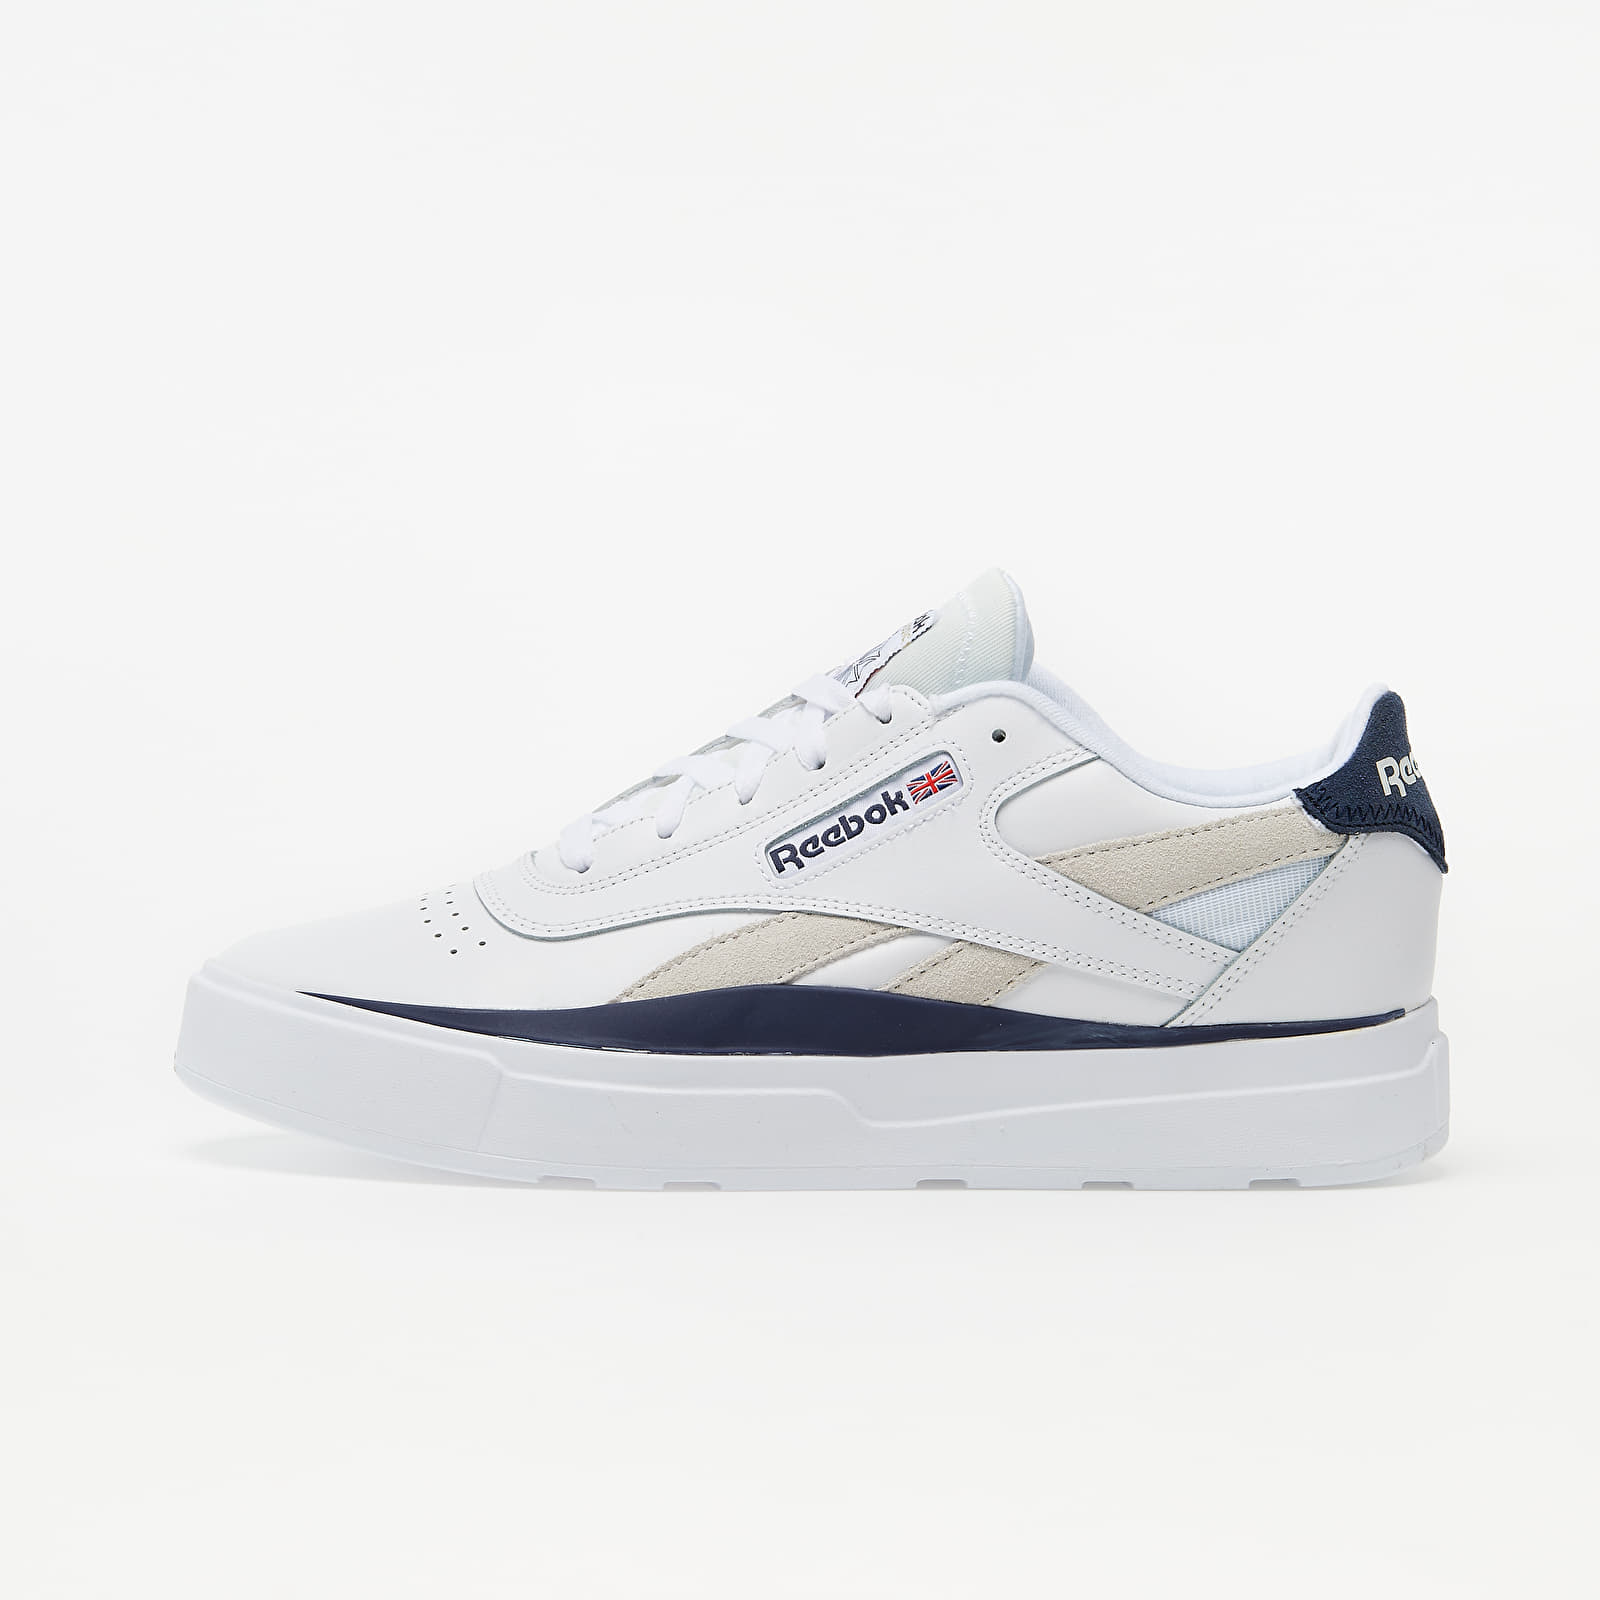 Chaussures et baskets homme Reebok Legacy Court White/ Vector Navy/ White